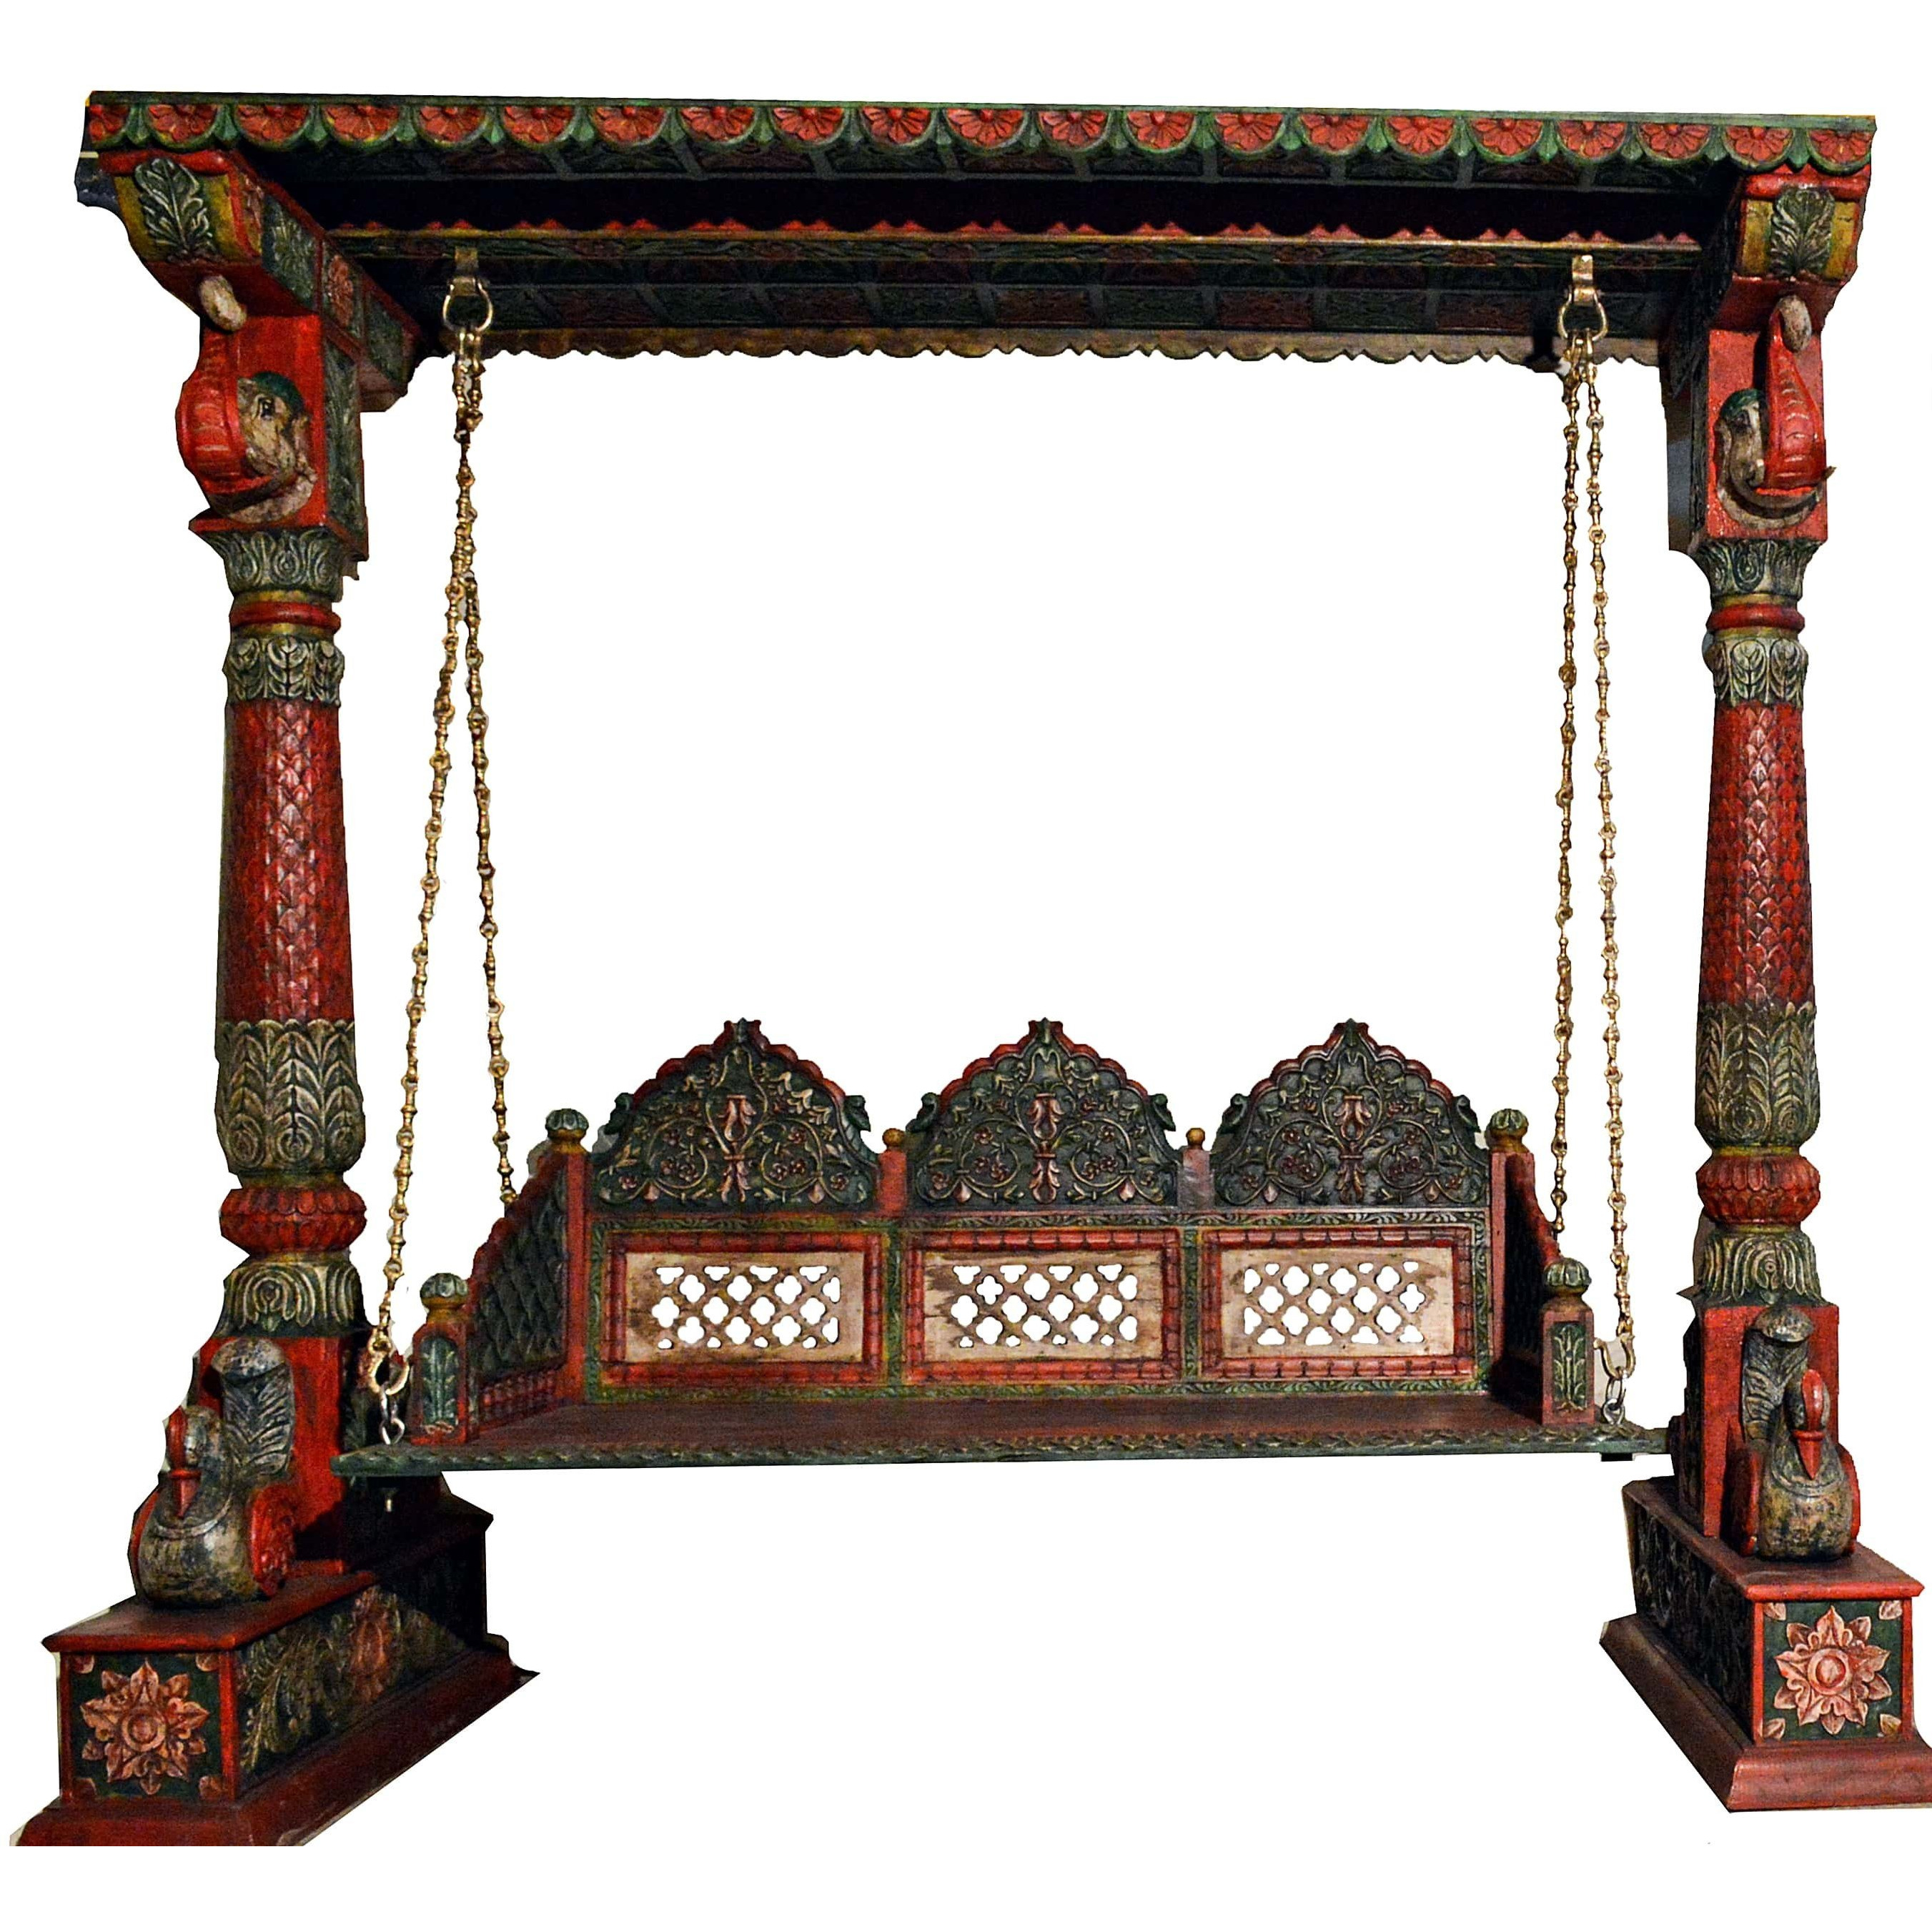 Carved Elephant & Peacock Multicolor Wooden Carved Royal Swing Set / Indoor Jhula